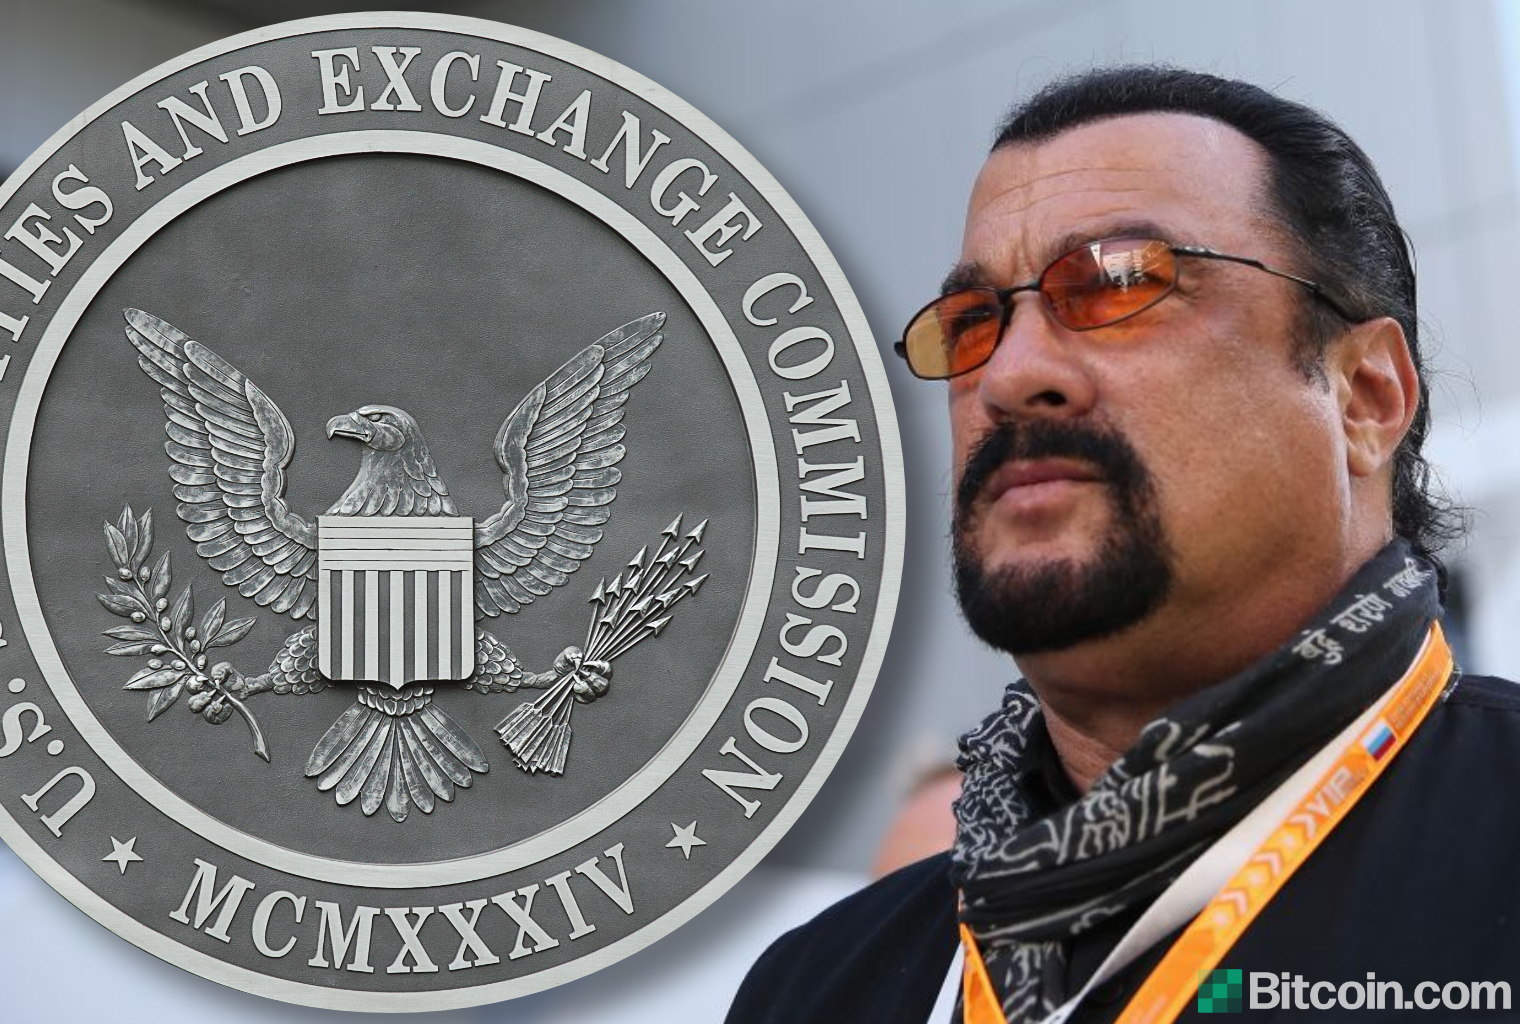 Steven seagal bitcoin us taxes on cryptocurrency